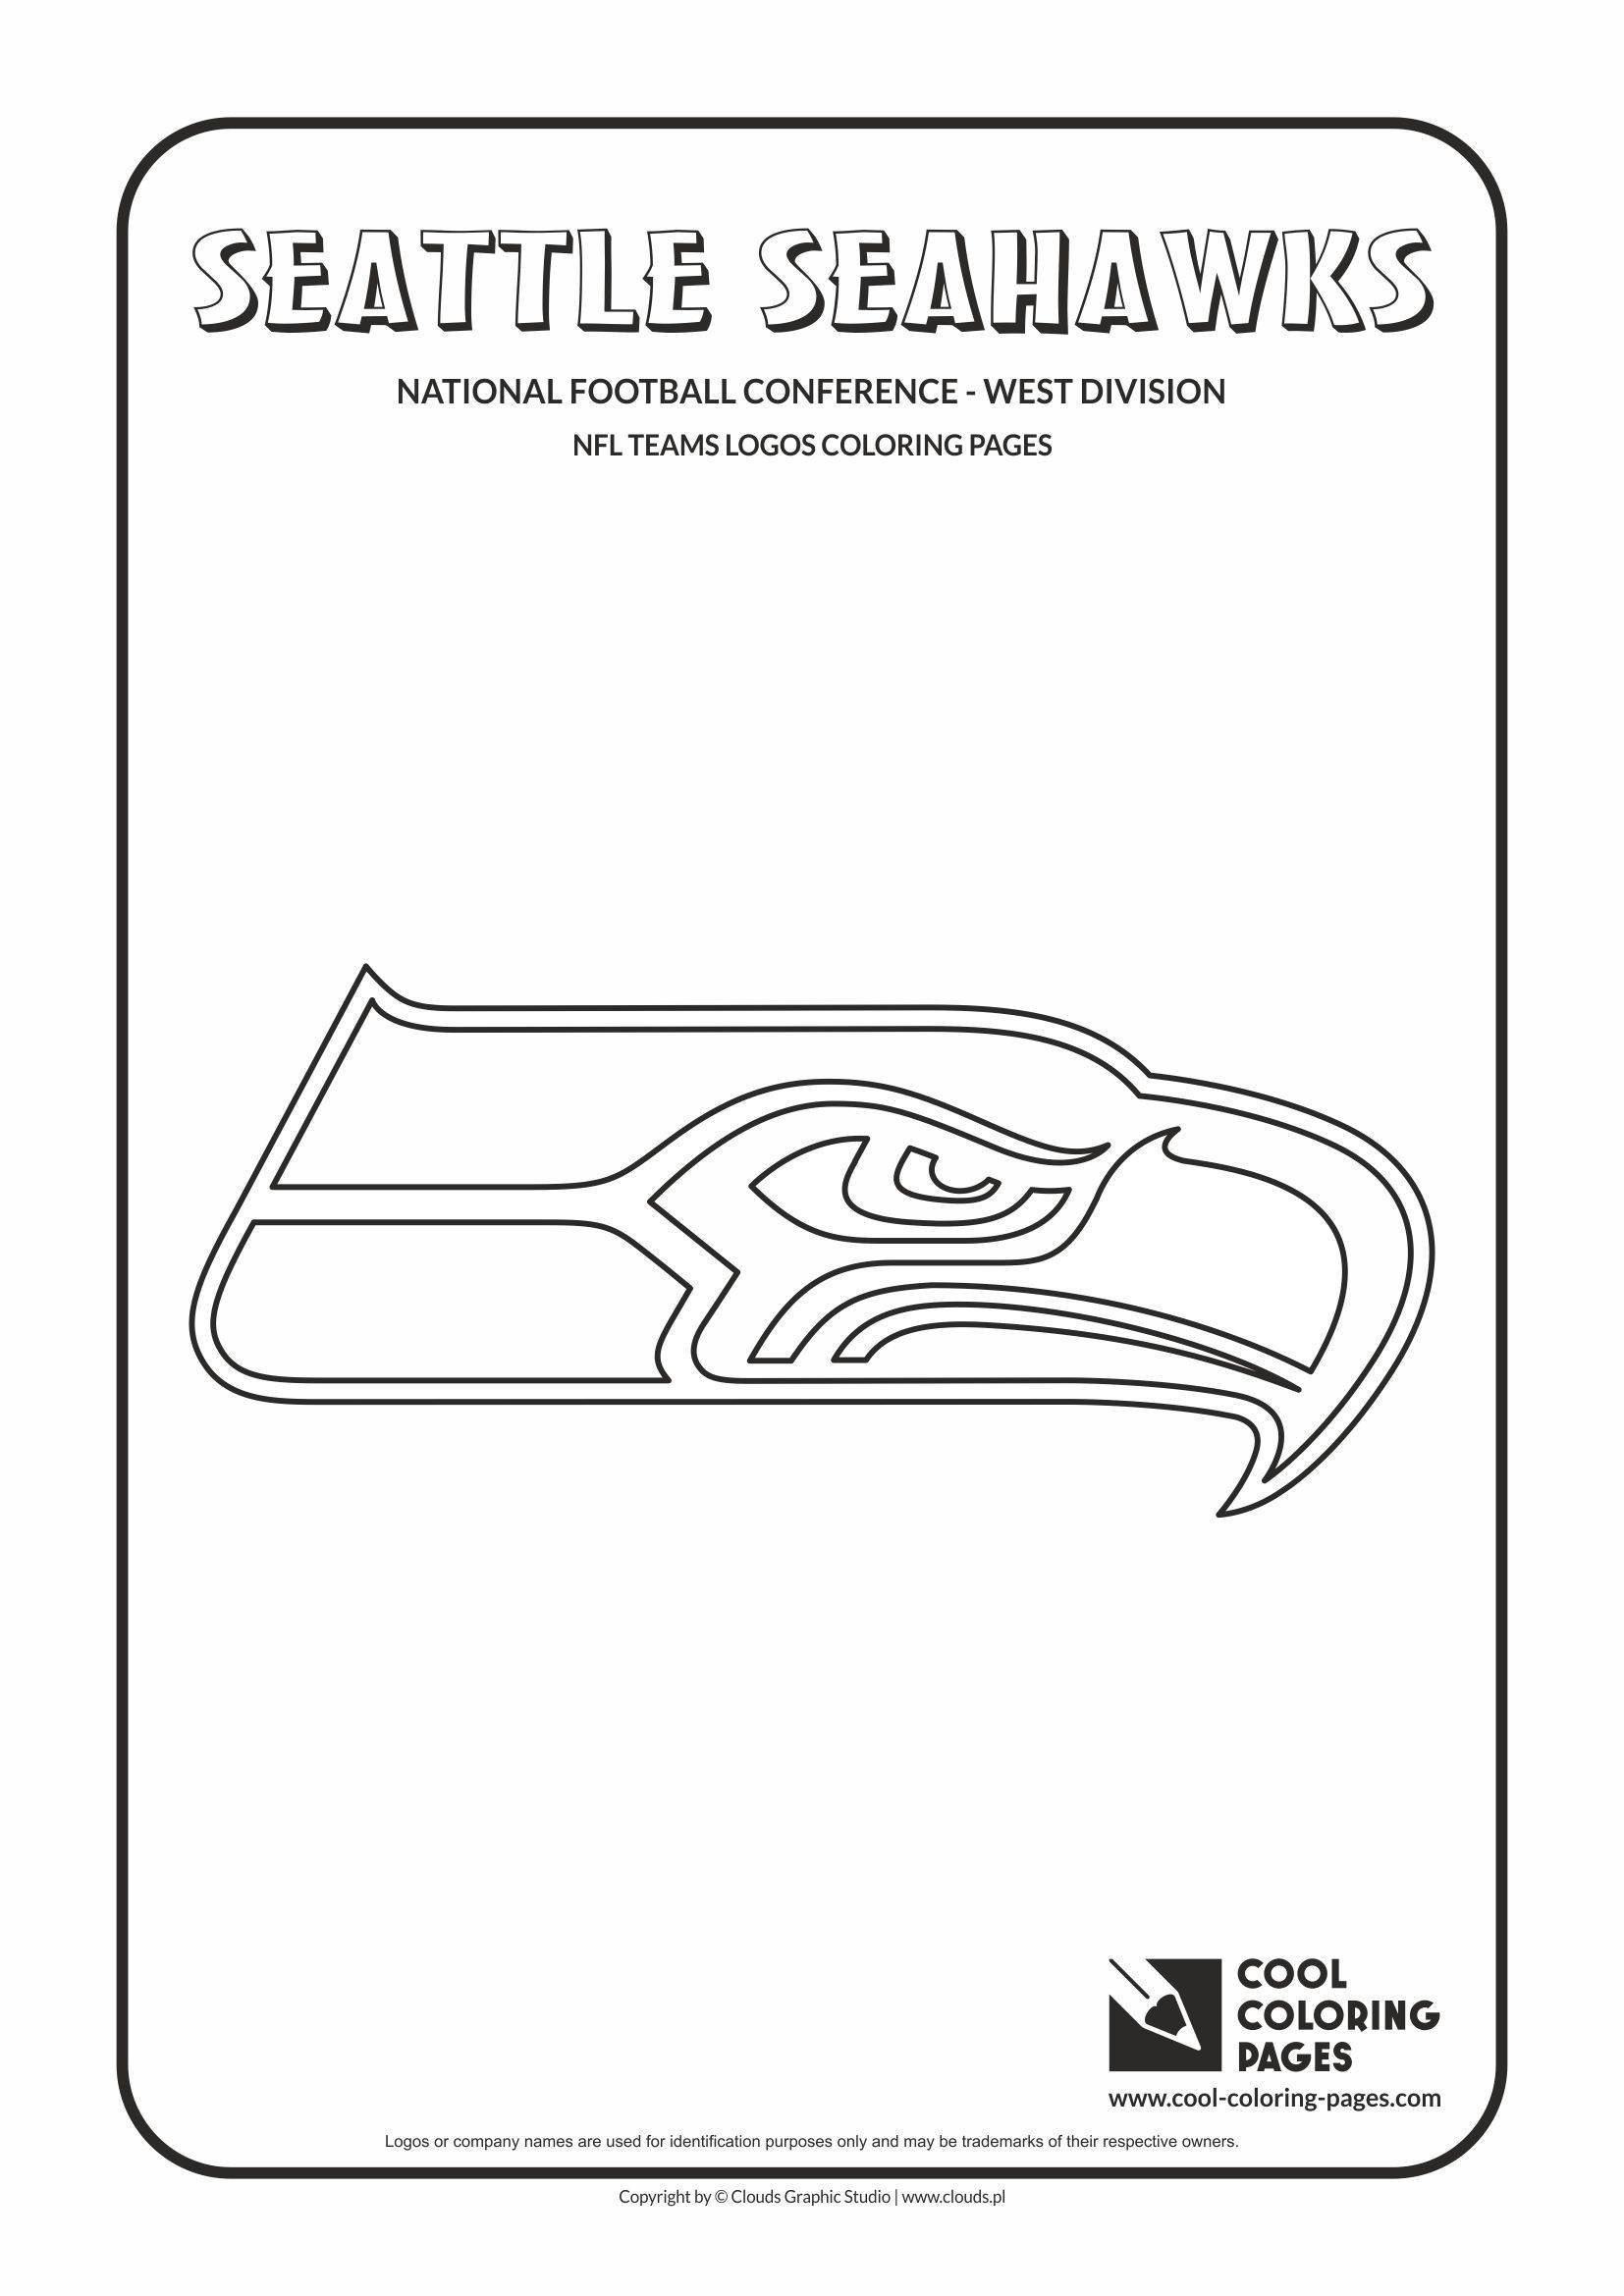 Seattle Seahawks Coloring Fun with Free Printable Seahawks Coloring Pages